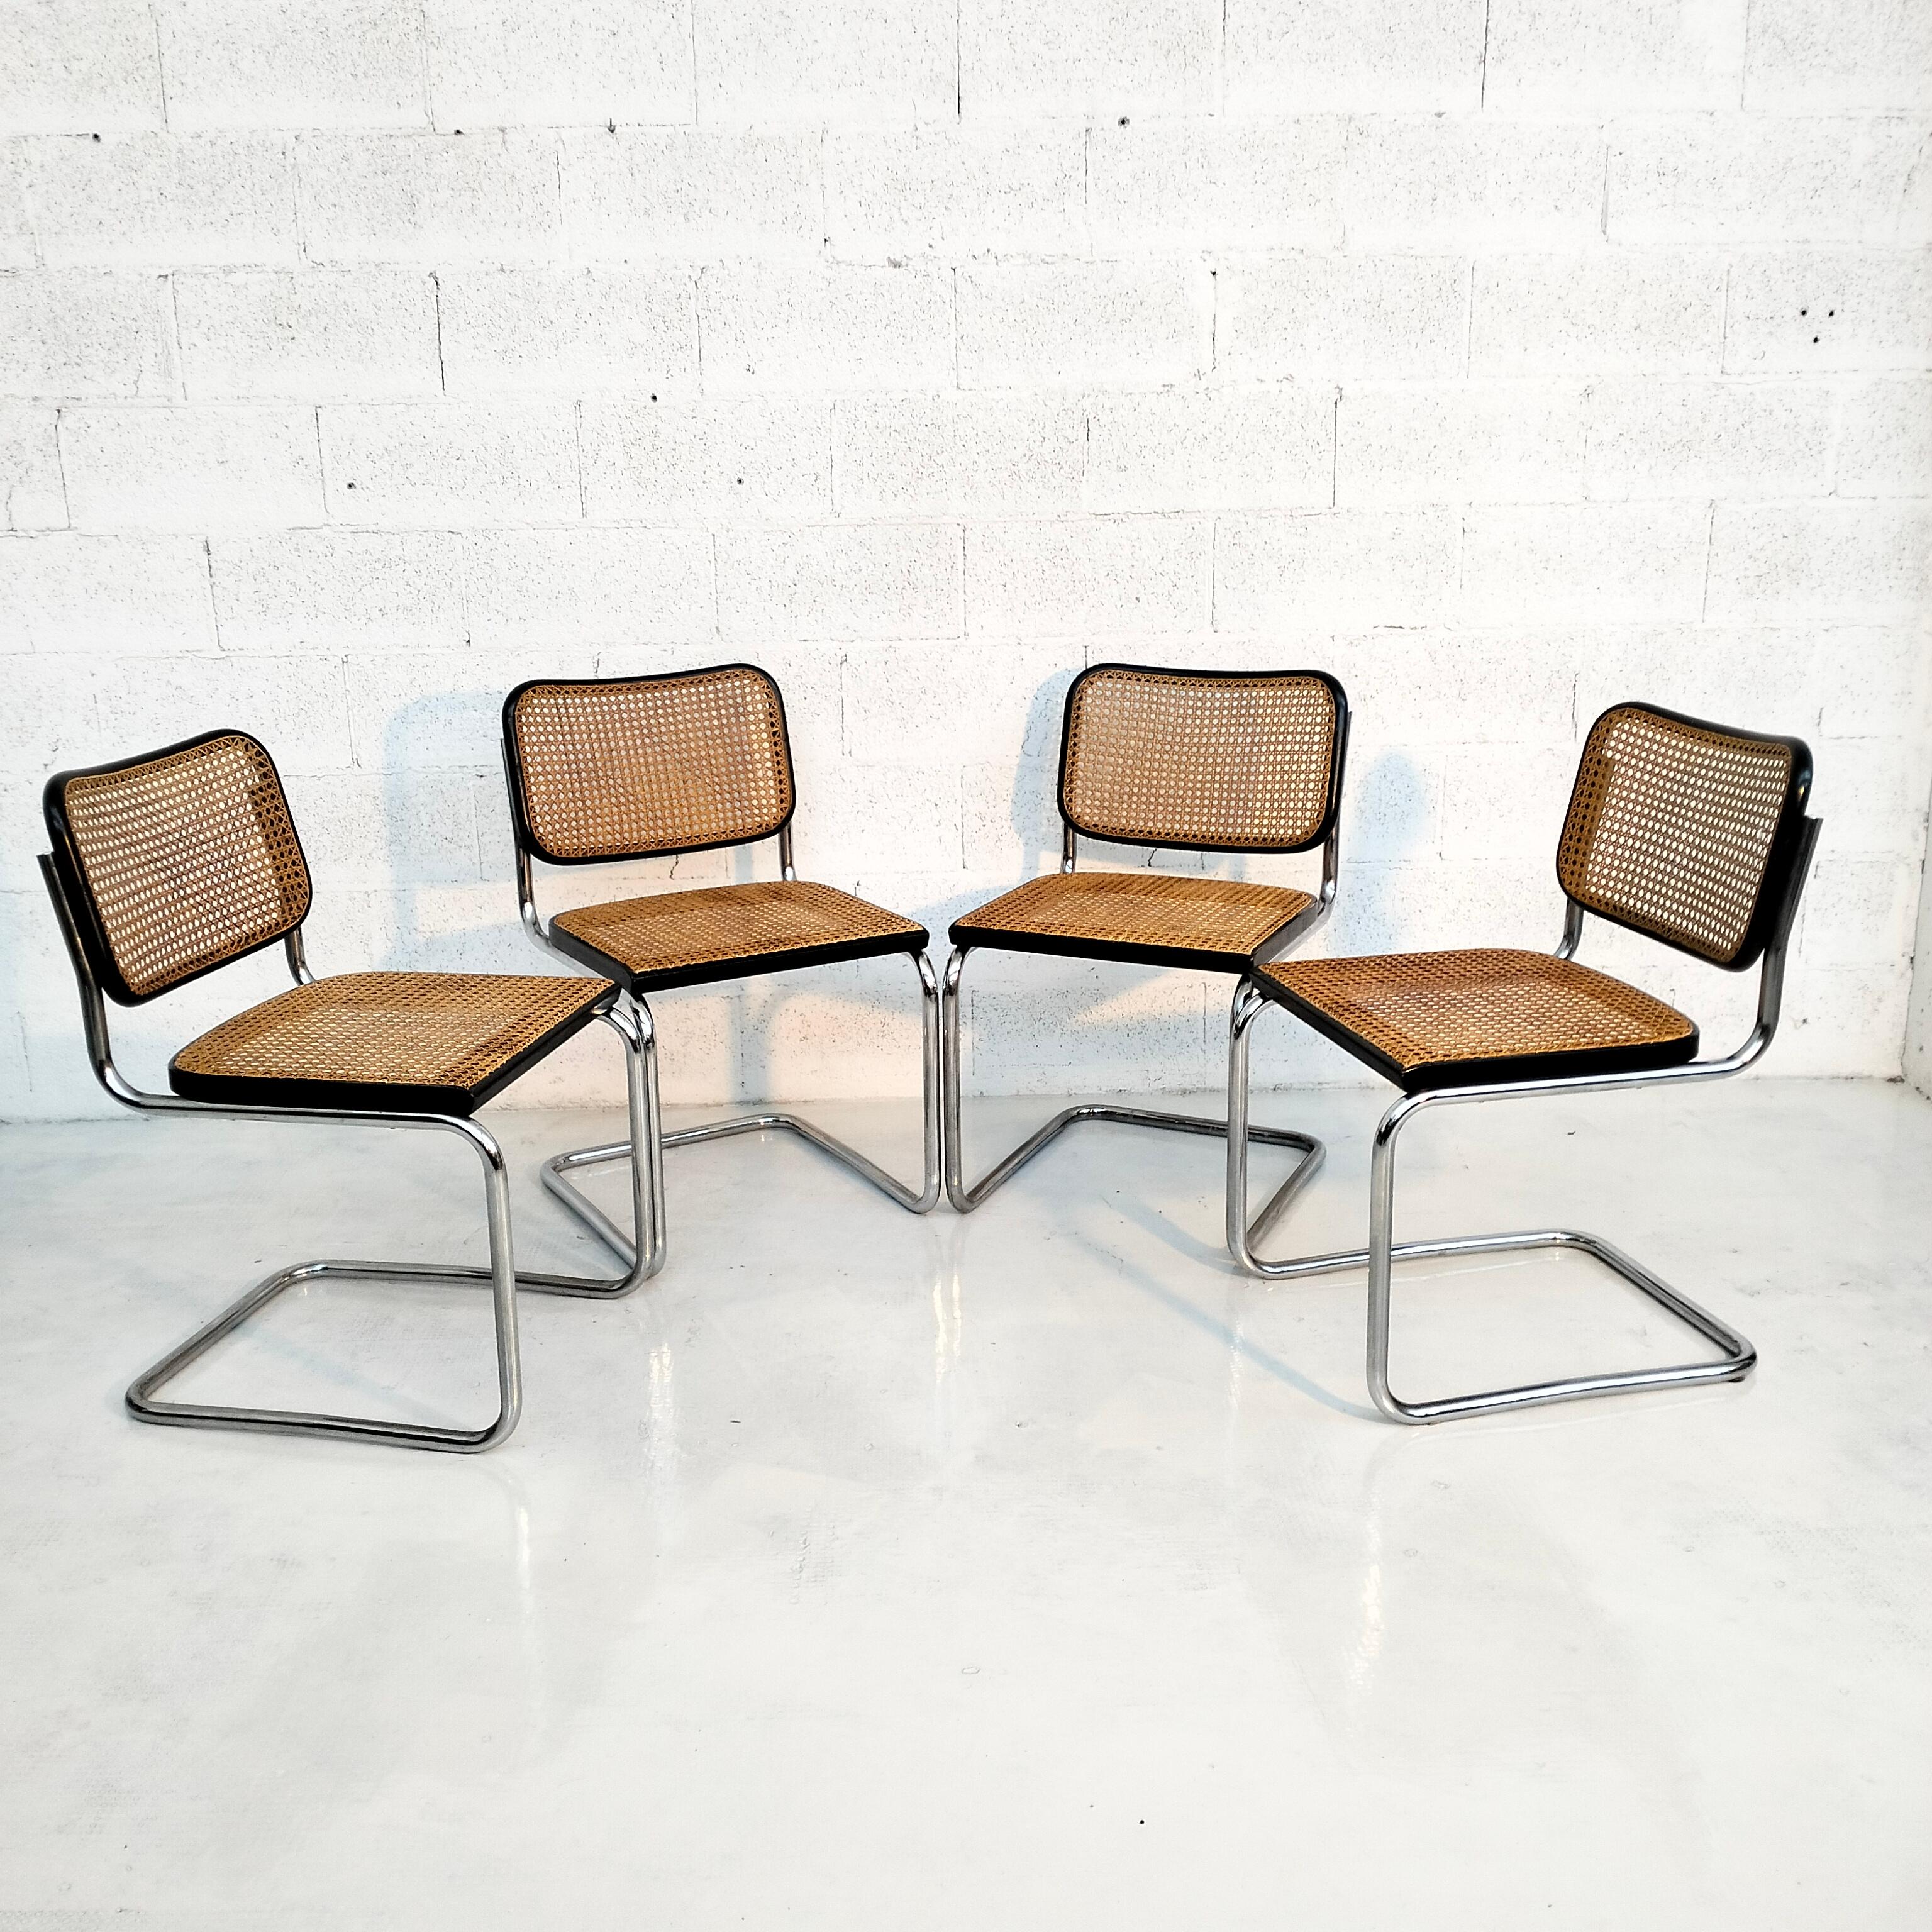 Set of 4 Original Cesca Chairs, by Marcel Breuer for Gavina, Italy In Good Condition For Sale In Padova, IT